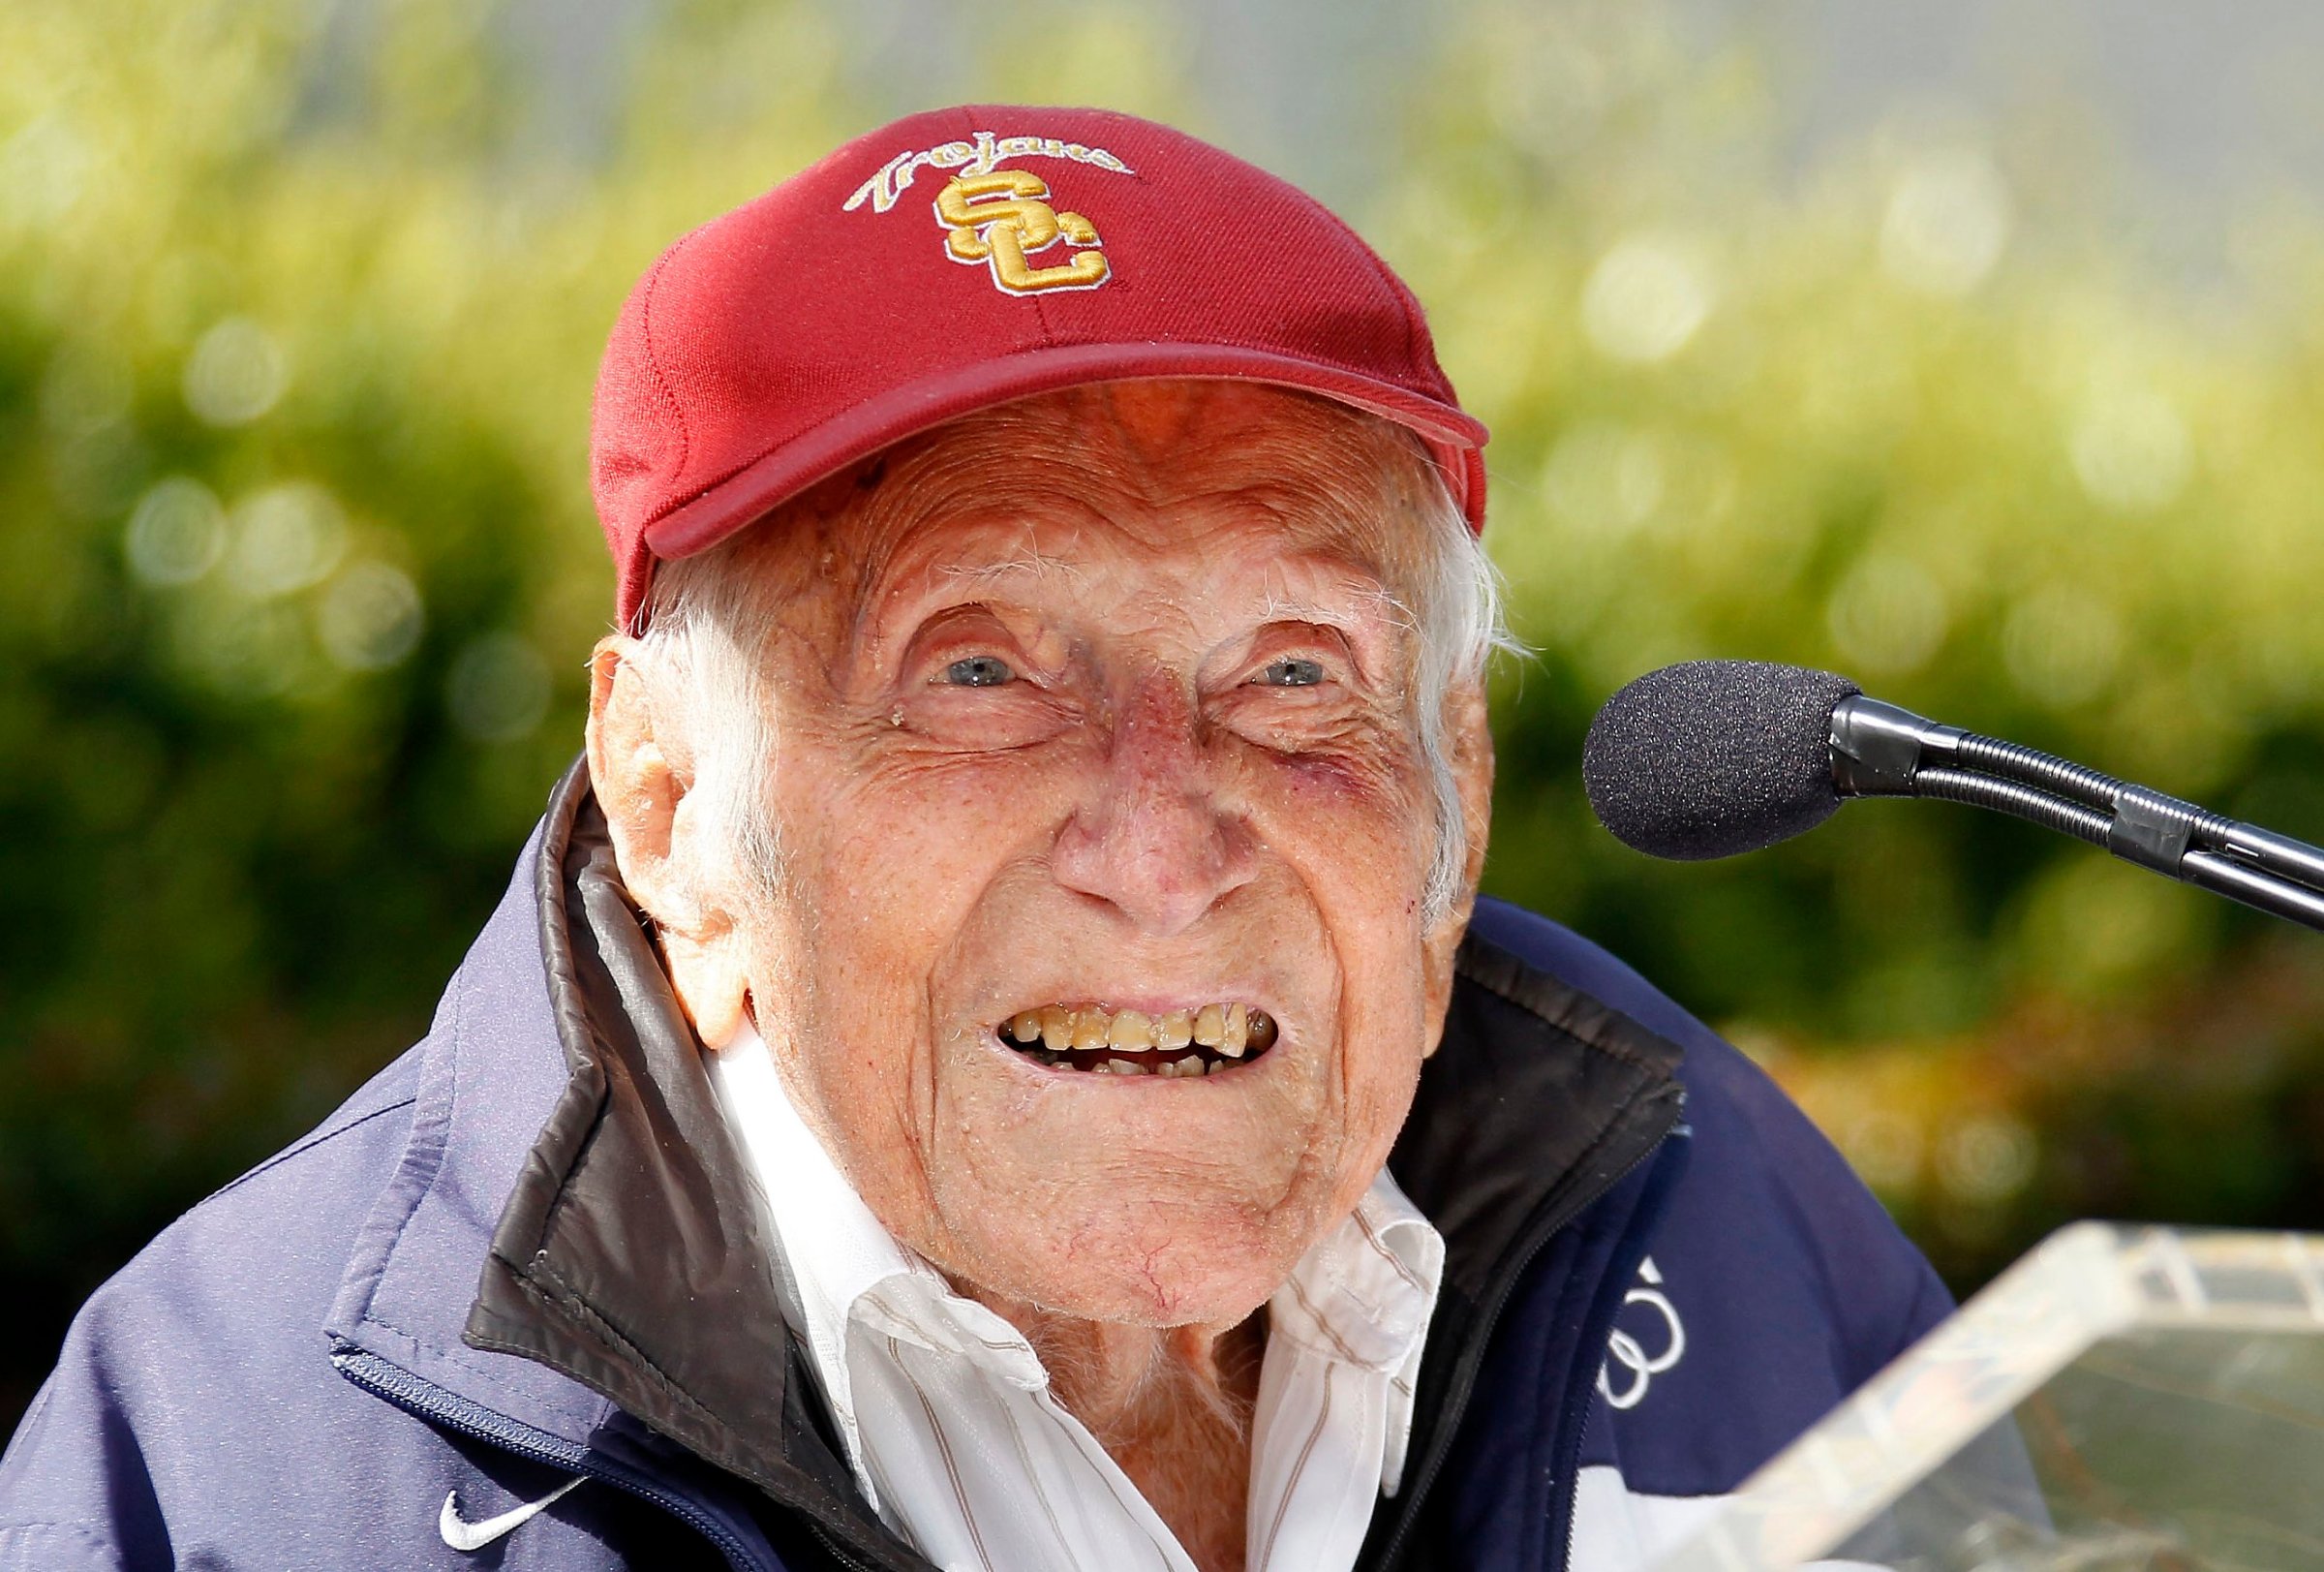 Louis Zamperini gestures during a news conference, in Pasadena, Calif. Zamperini, a U.S. Olympic distance runner and World War II veteran who survived 47 days on a raft in the Pacific after his bomber crashed, then endured two years in Japanese prison camps, died Wednesday, July 2, 2014.